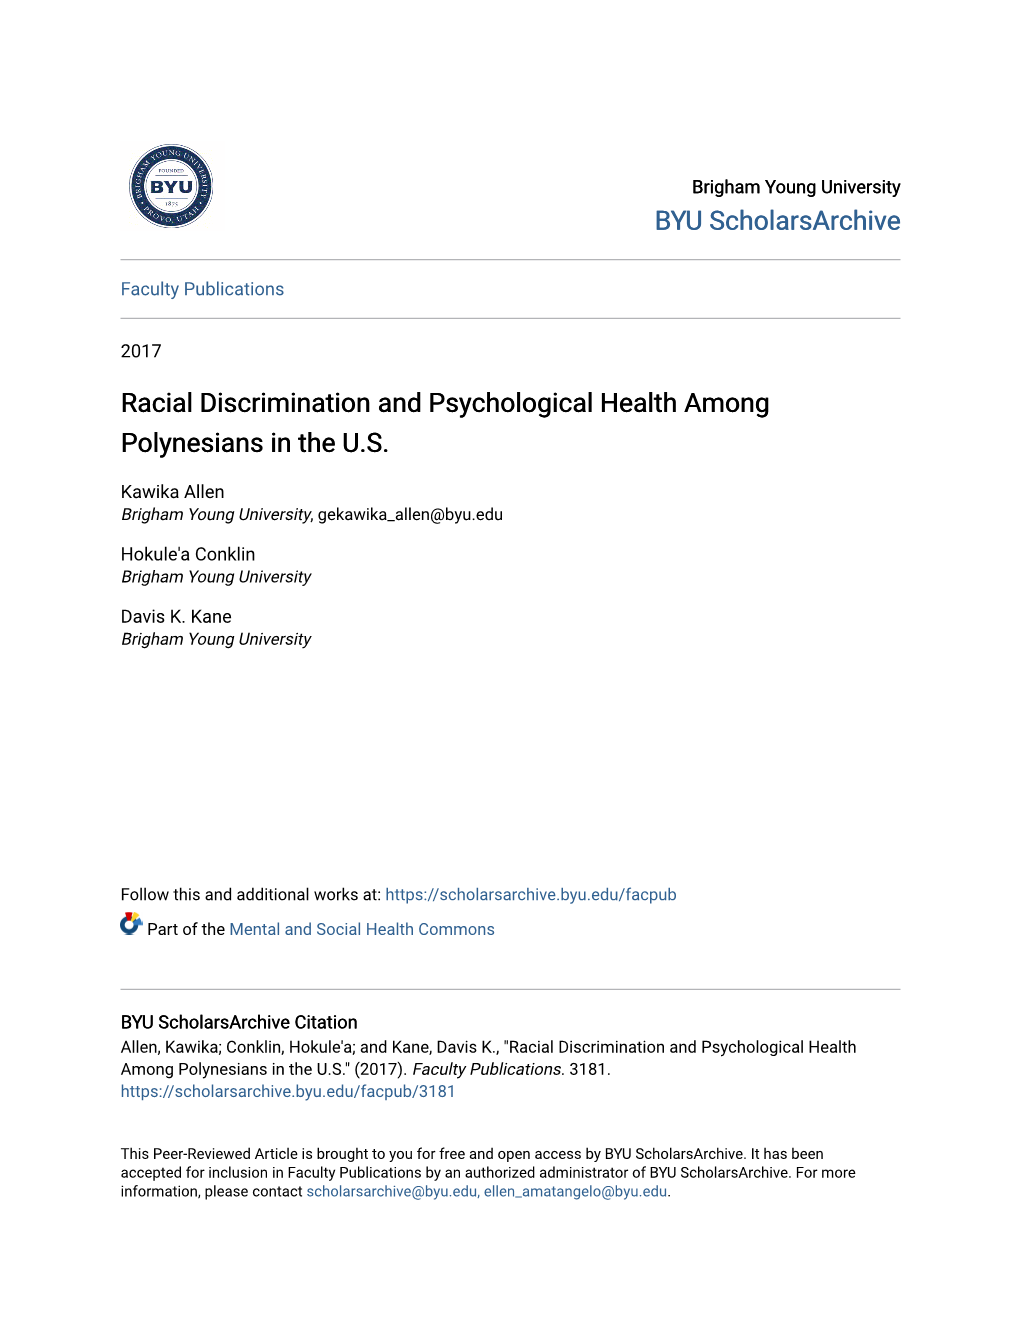 Racial Discrimination and Psychological Health Among Polynesians in the U.S